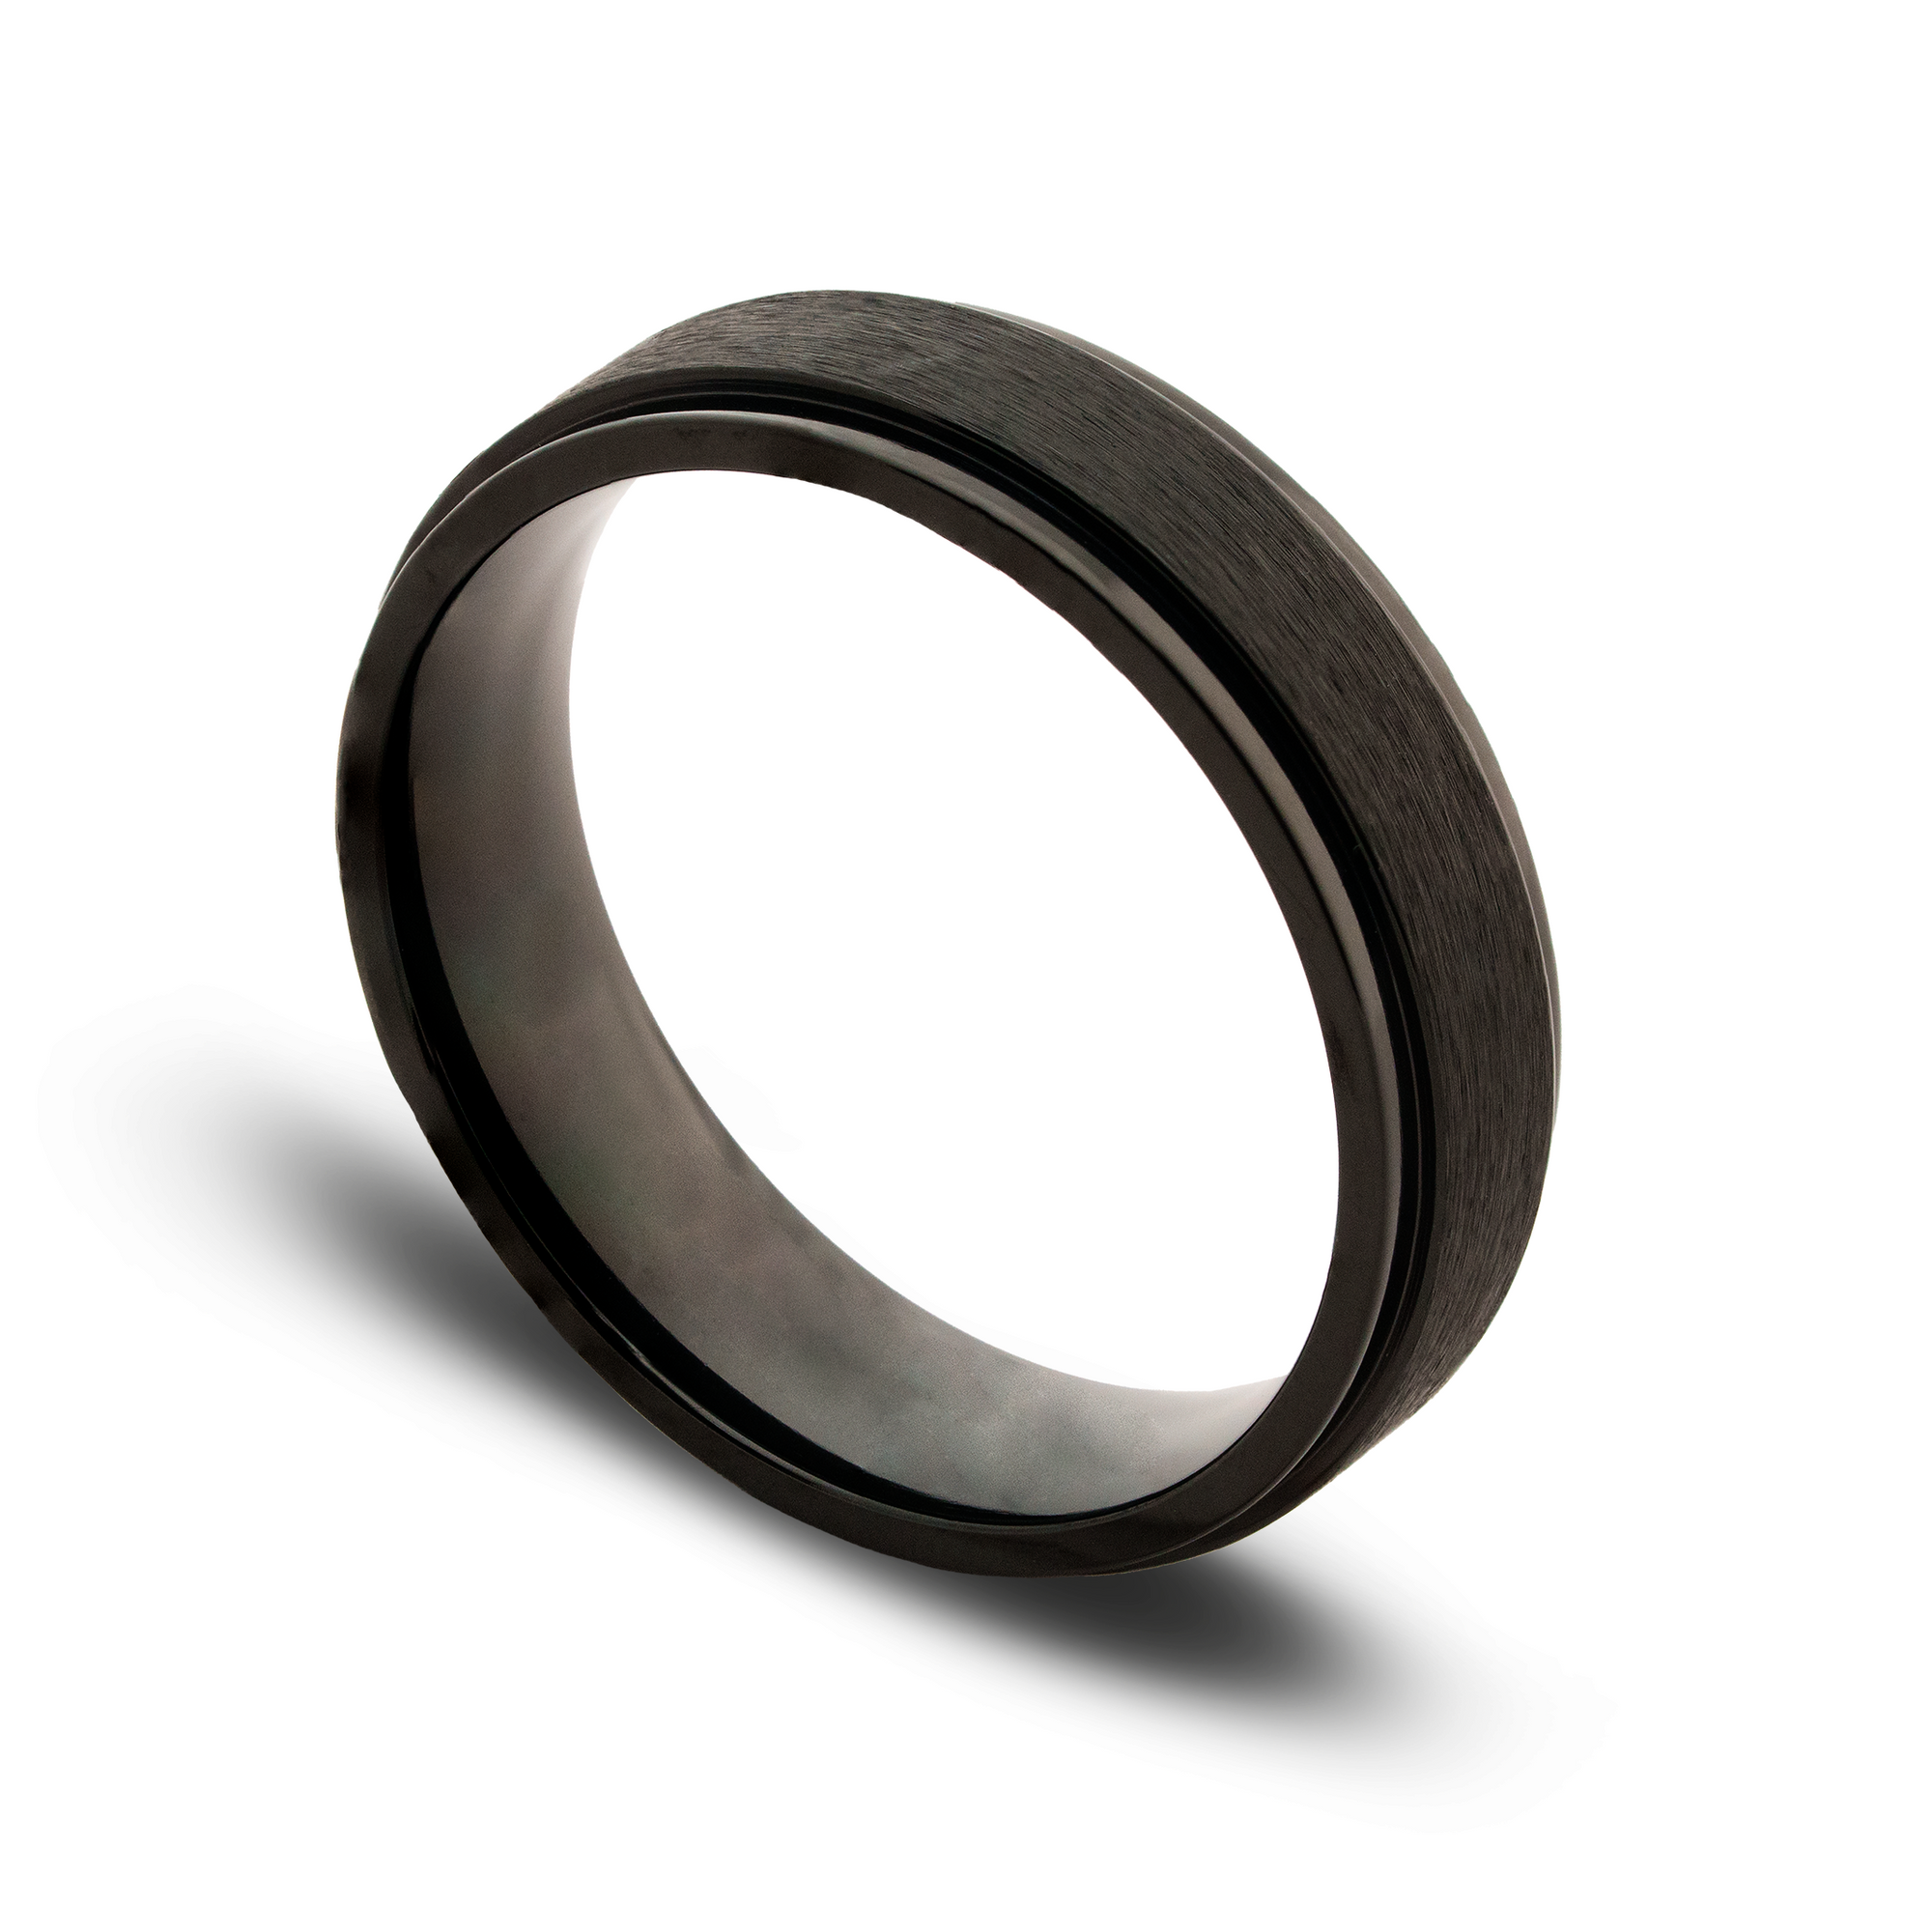 NEW: The “Midnight” Ring